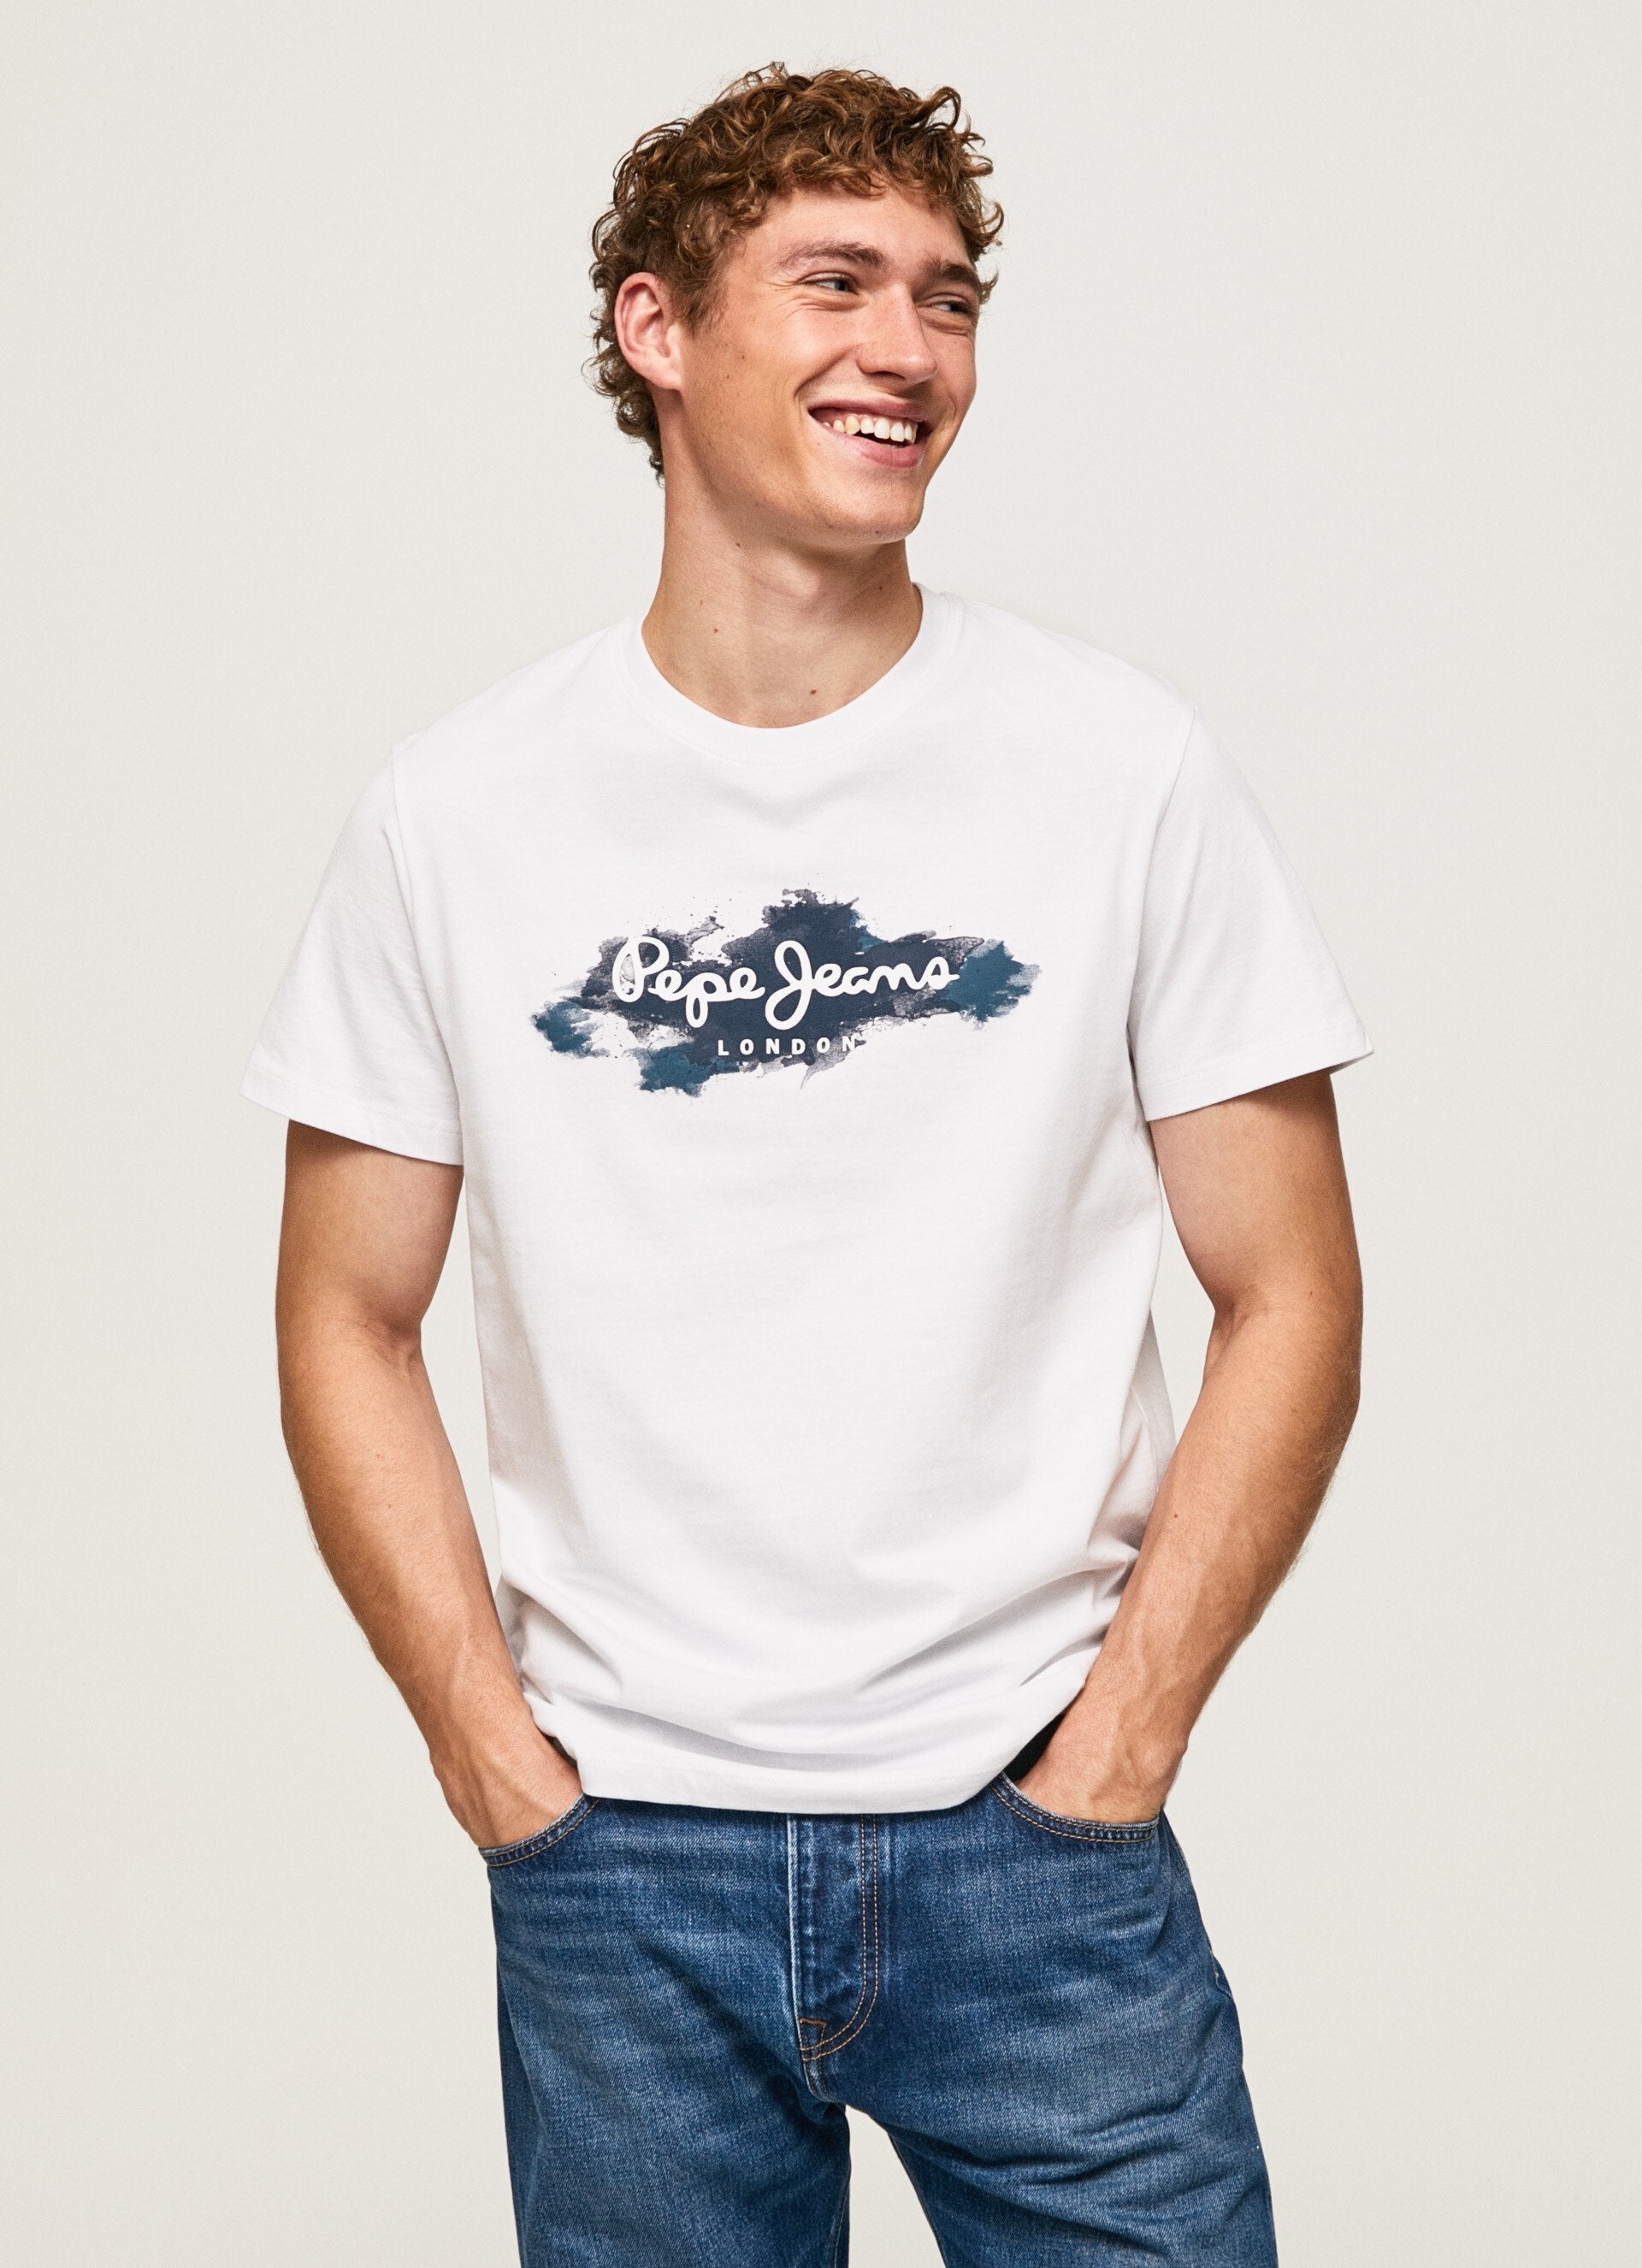 PEPE JEANS LONDON OLDWIVE T-SHIRT WHITE | FIT REGULAR